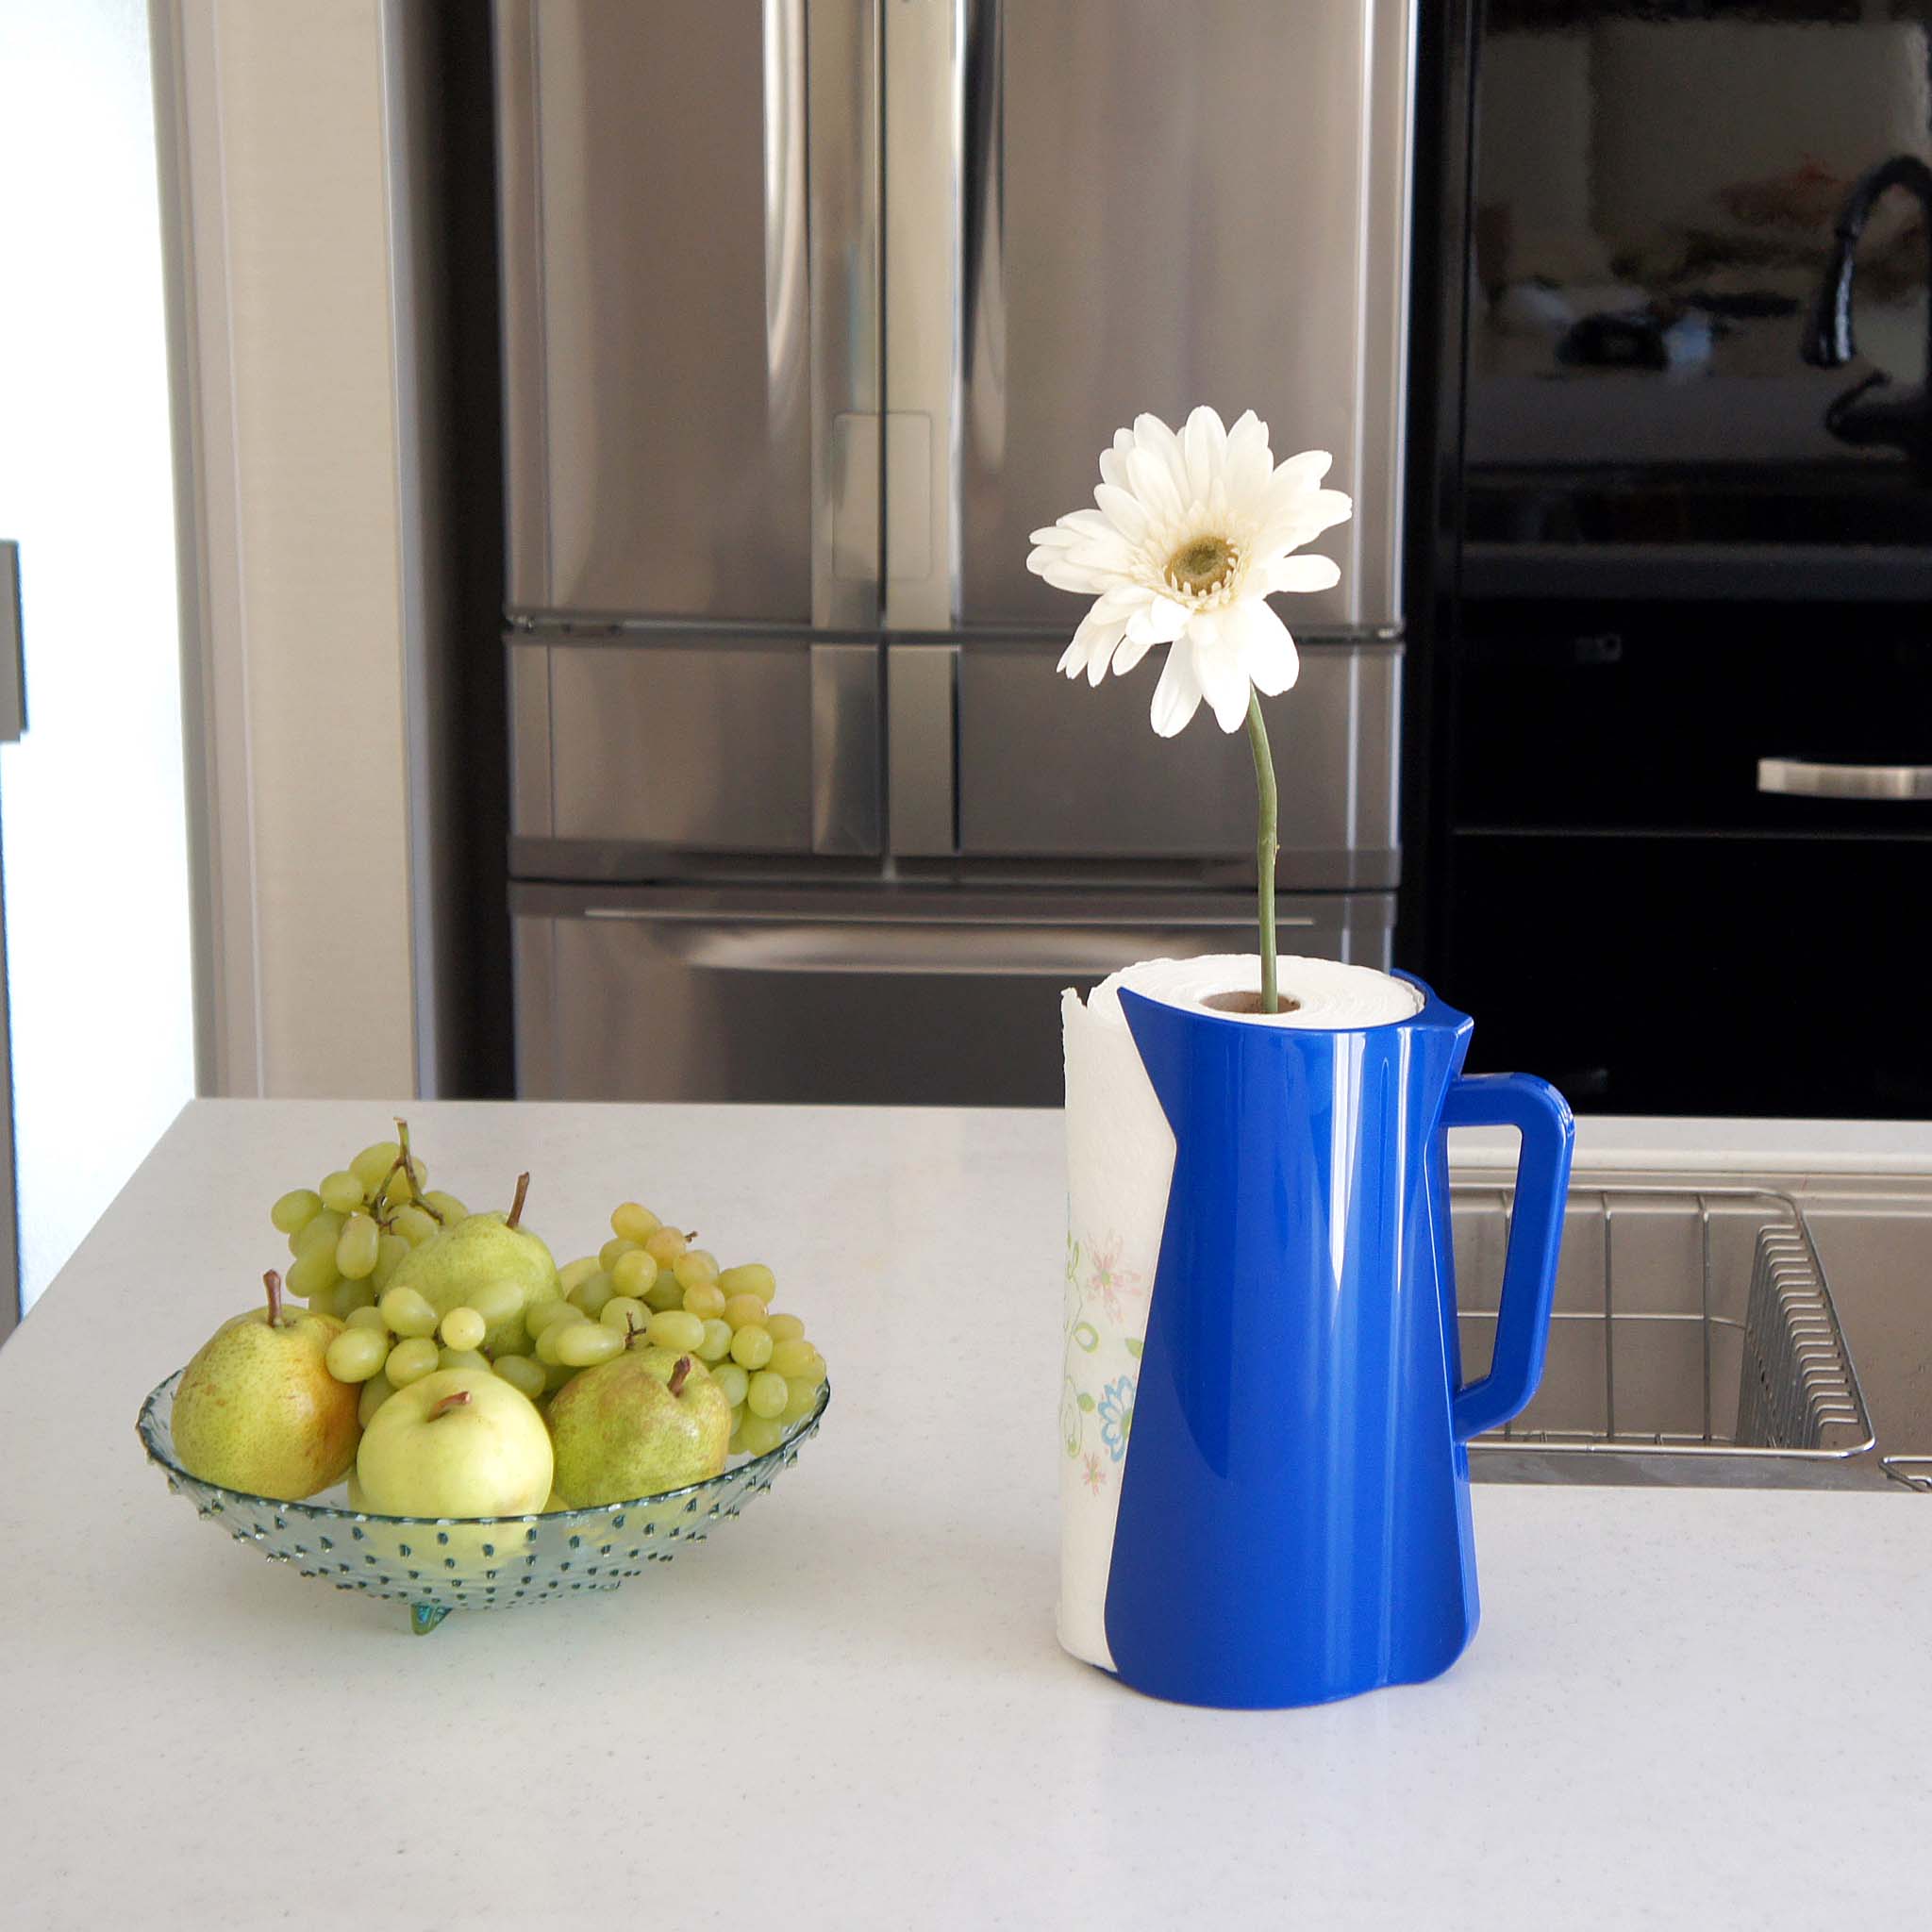 A sleek and stylish paper towel holder to brighten up the kitchen.